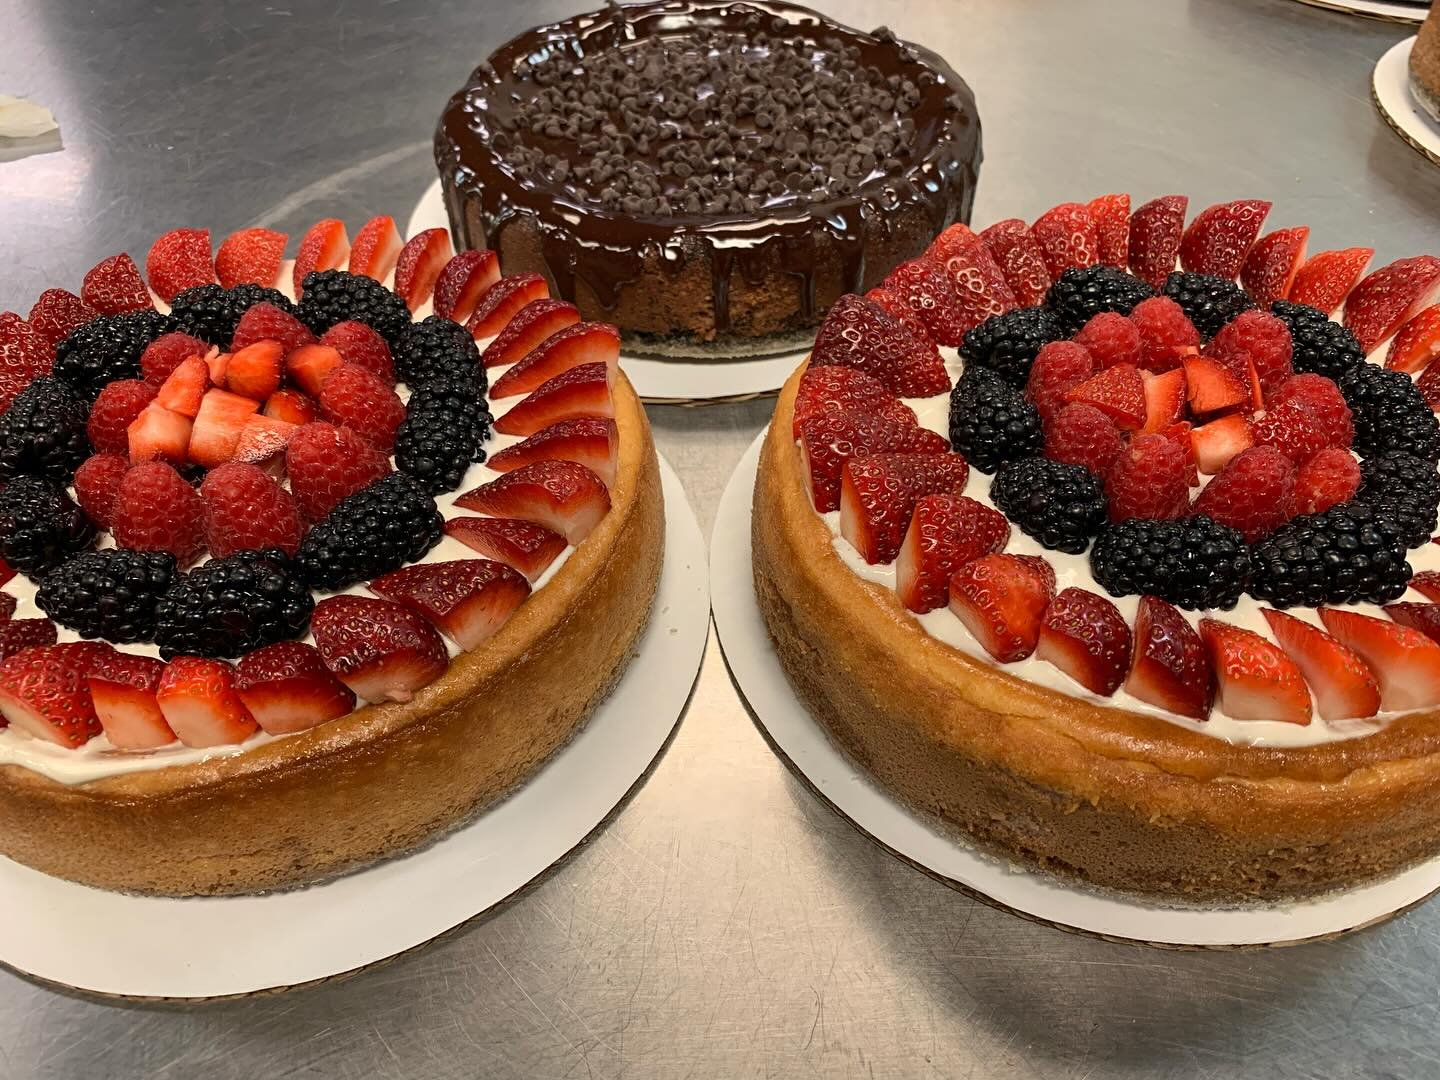 3 Large Cheesecakes Available &mdash;$55 each
(Left to right)

1) Vanilla Triple Berry (Vanilla filling, Vanilla Sour Cream, topped with Fresh Strawberries, Blackberries, and Raspberries
2) Chocolate Lover&rsquo;s (Chocolate Filling topped with Ganac